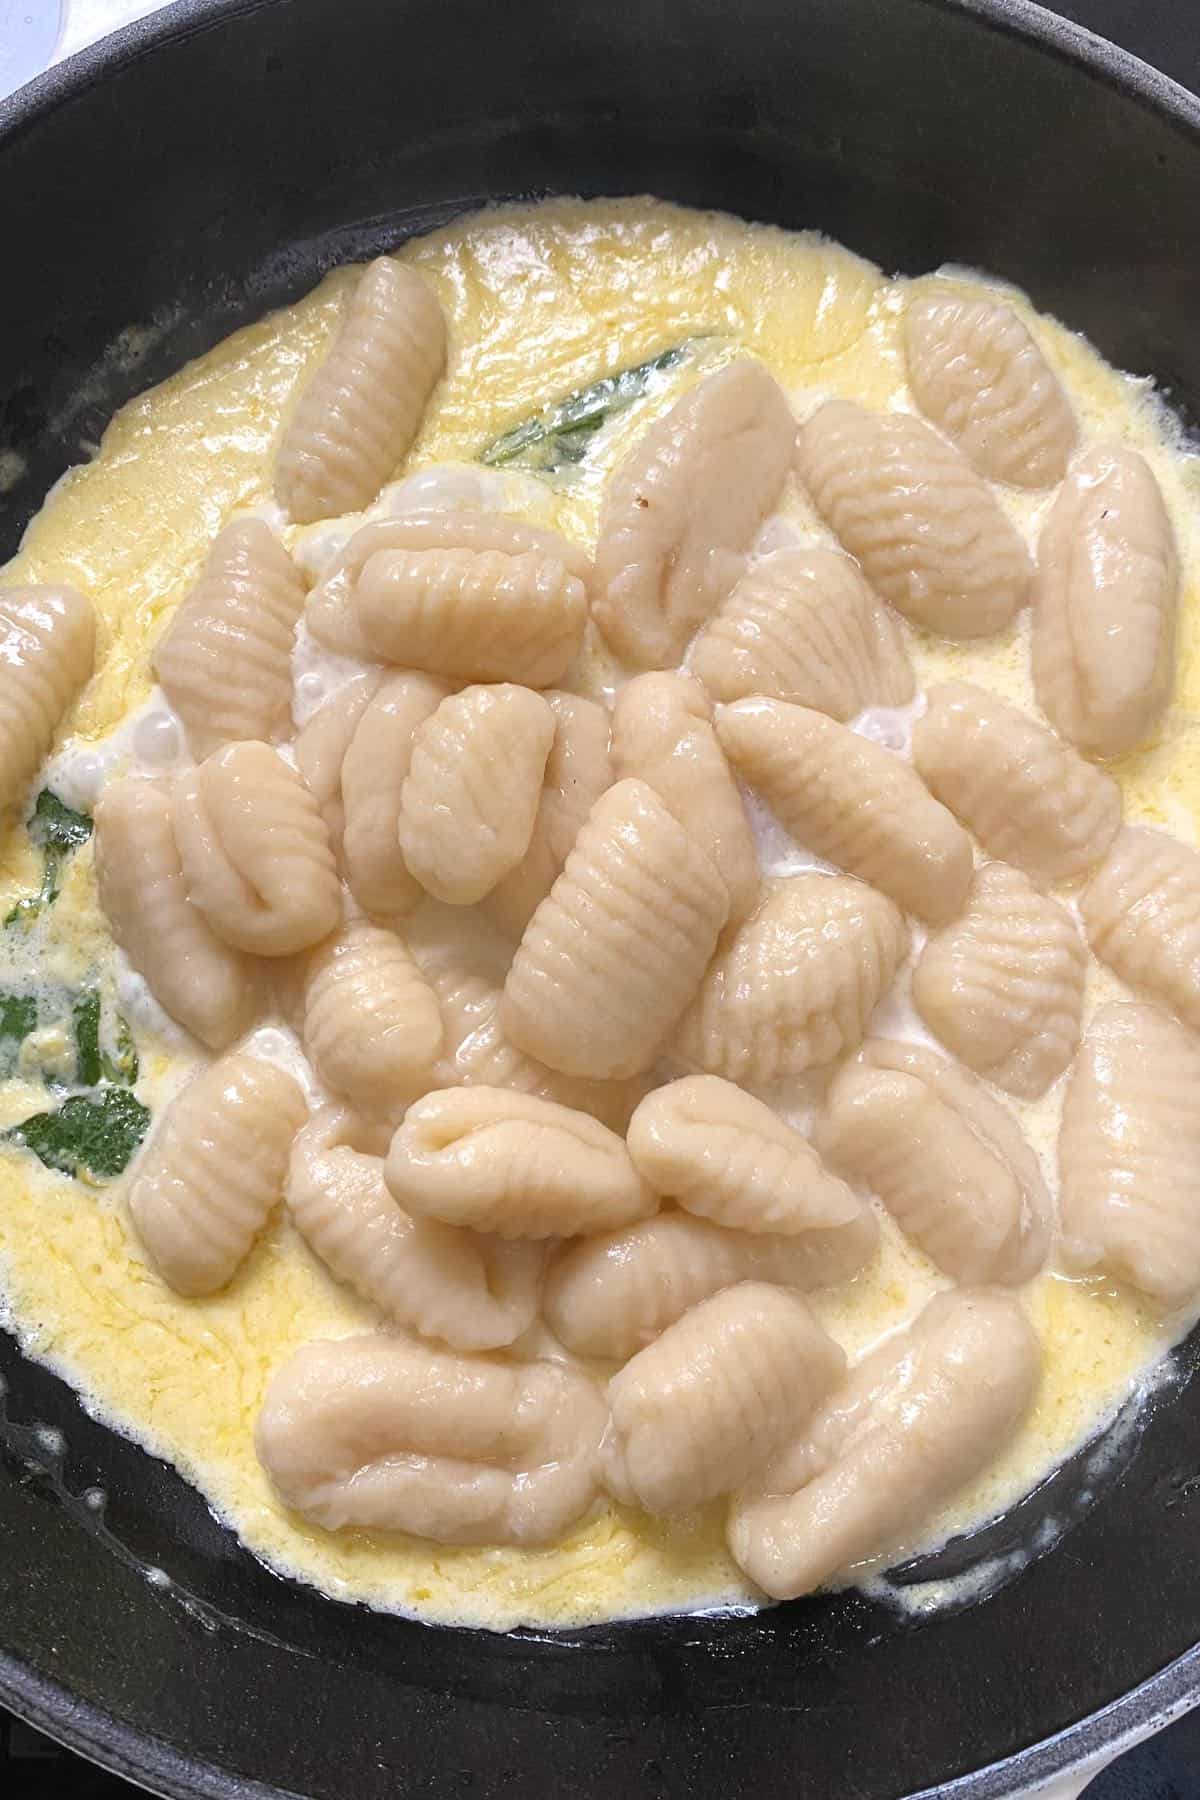 Gnocchi in a pan with some white sauce